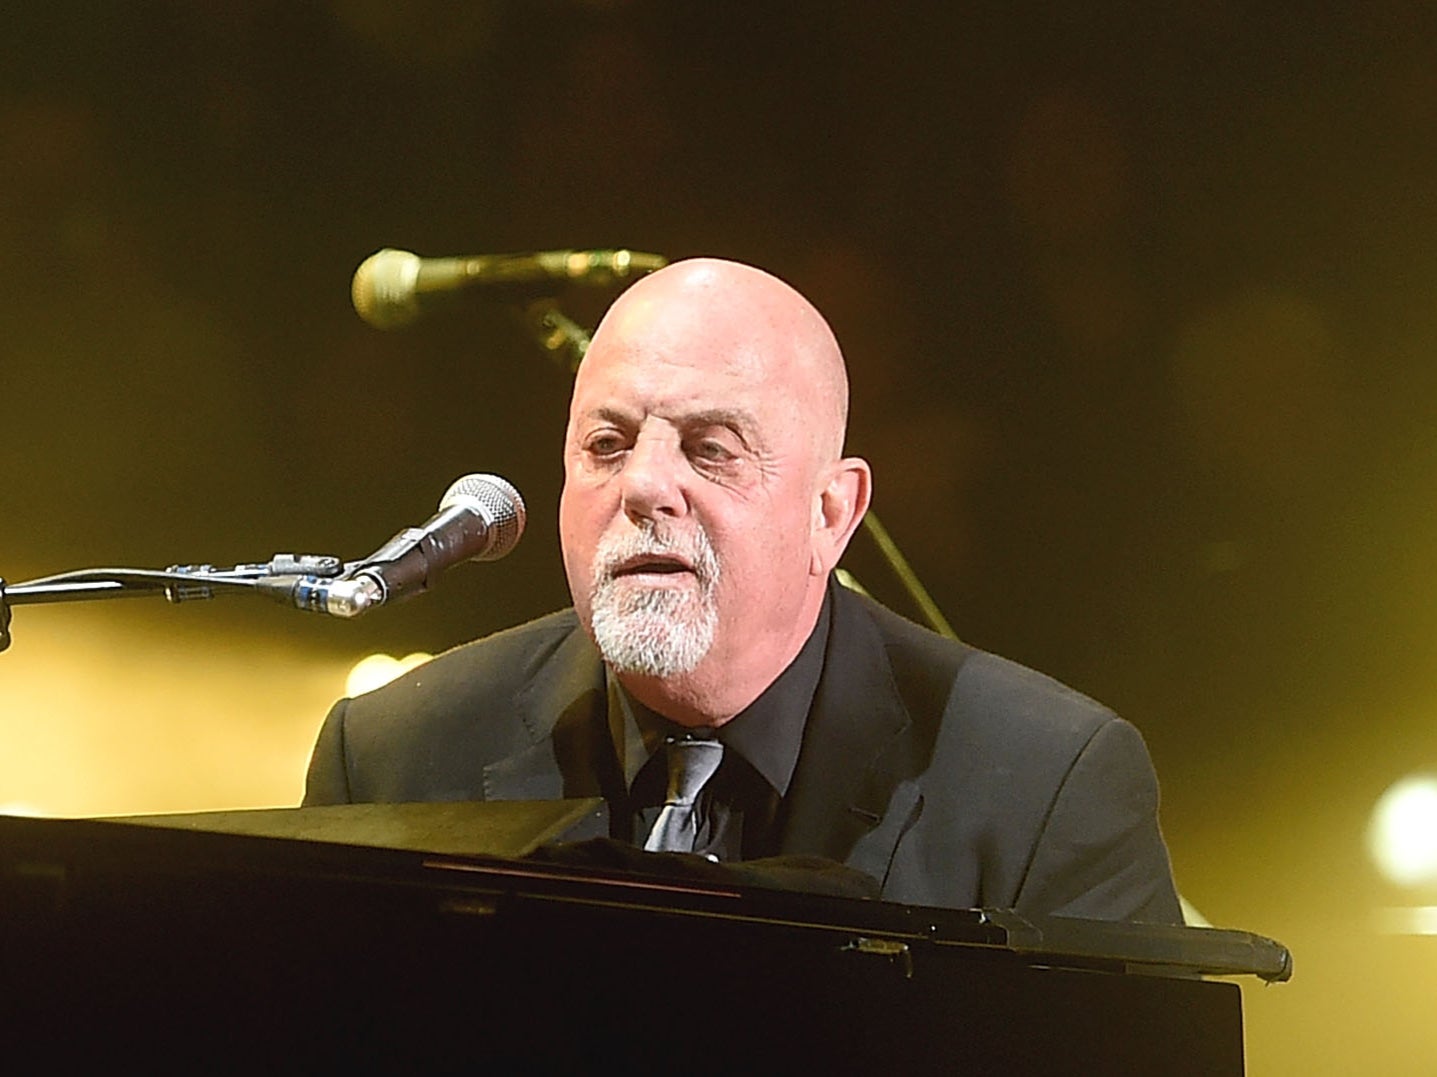 billy joel, bst hyde park, bruce springsteen, how to, billy joel to play london’s bst hyde park festival – and here’s how to get tickets